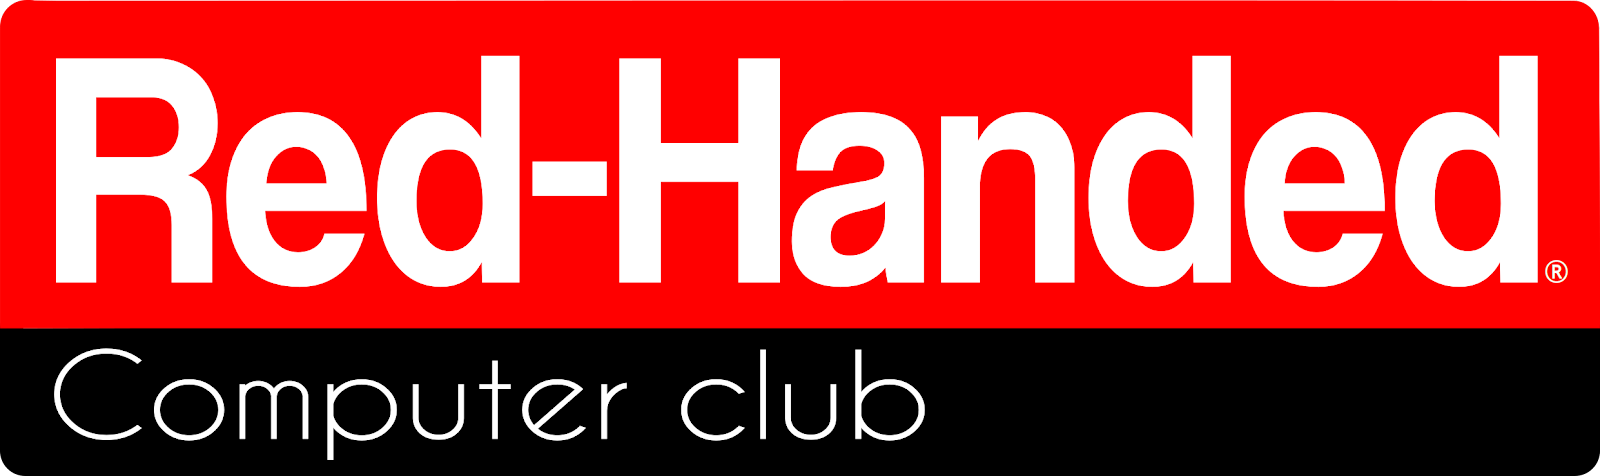 Red-Handed Computer Club